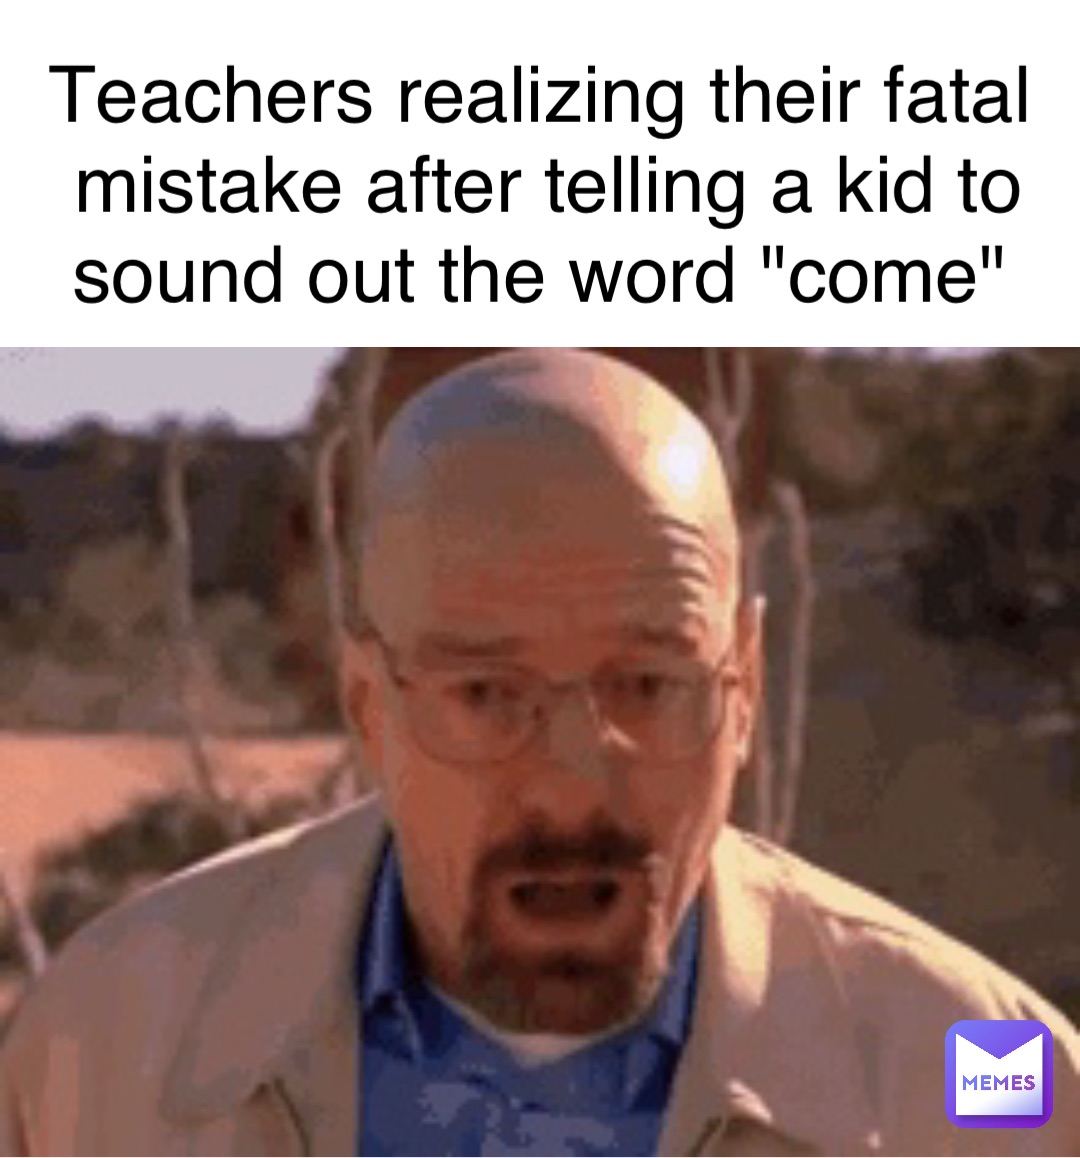 Teachers realizing their fatal mistake after telling a kid to sound out the word "come"